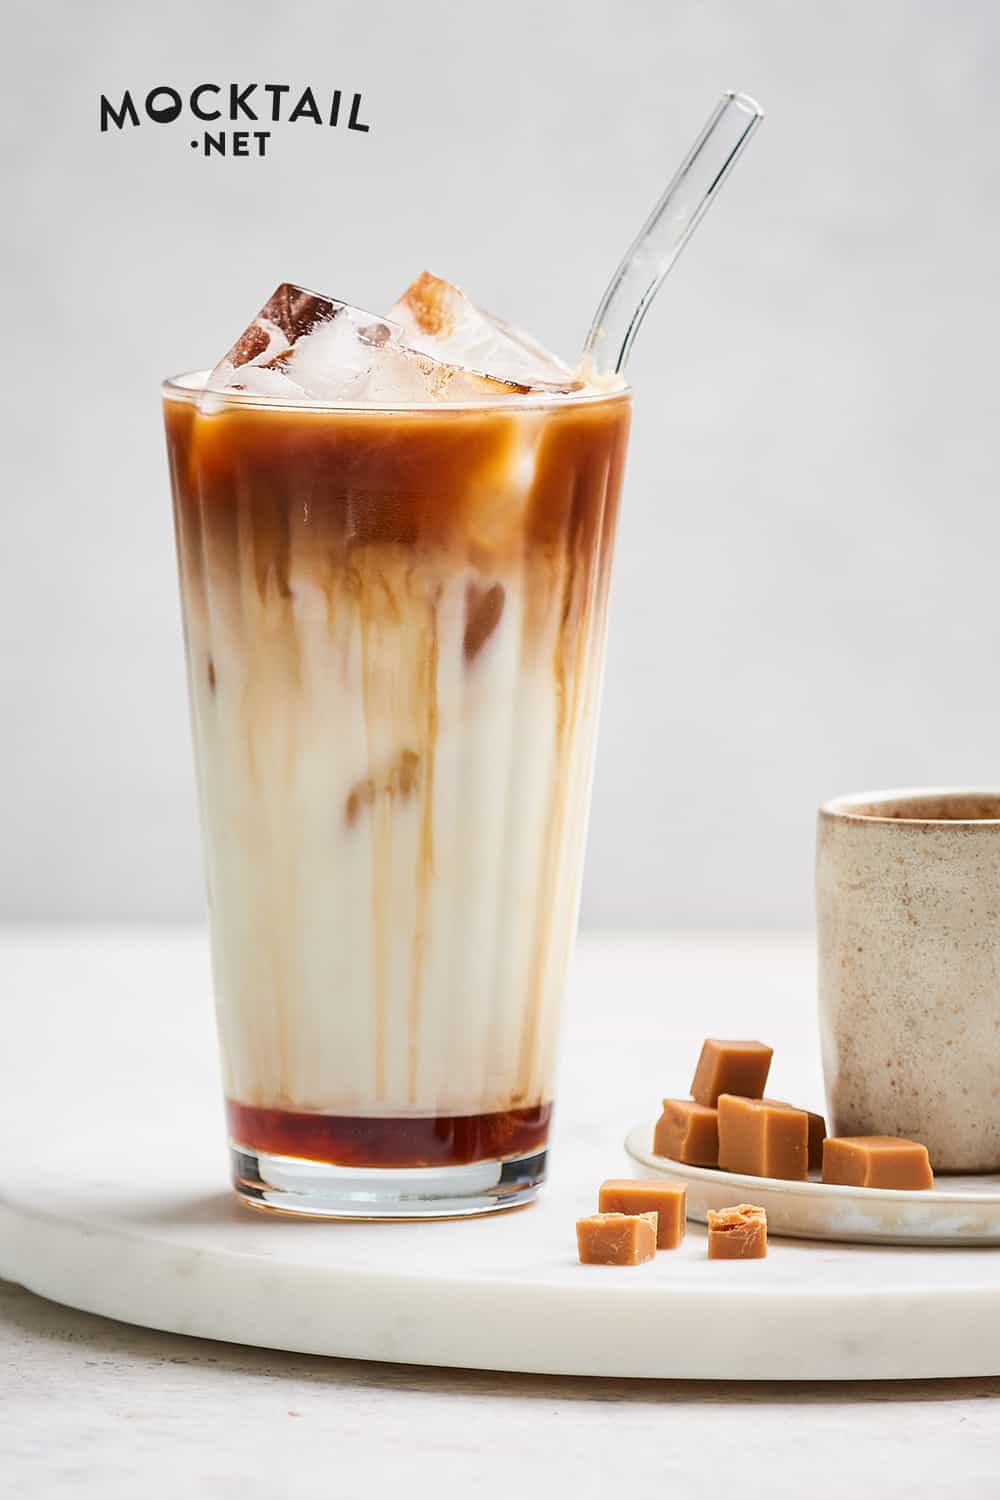 How to Make an Iced Caramel Macchiato at Home